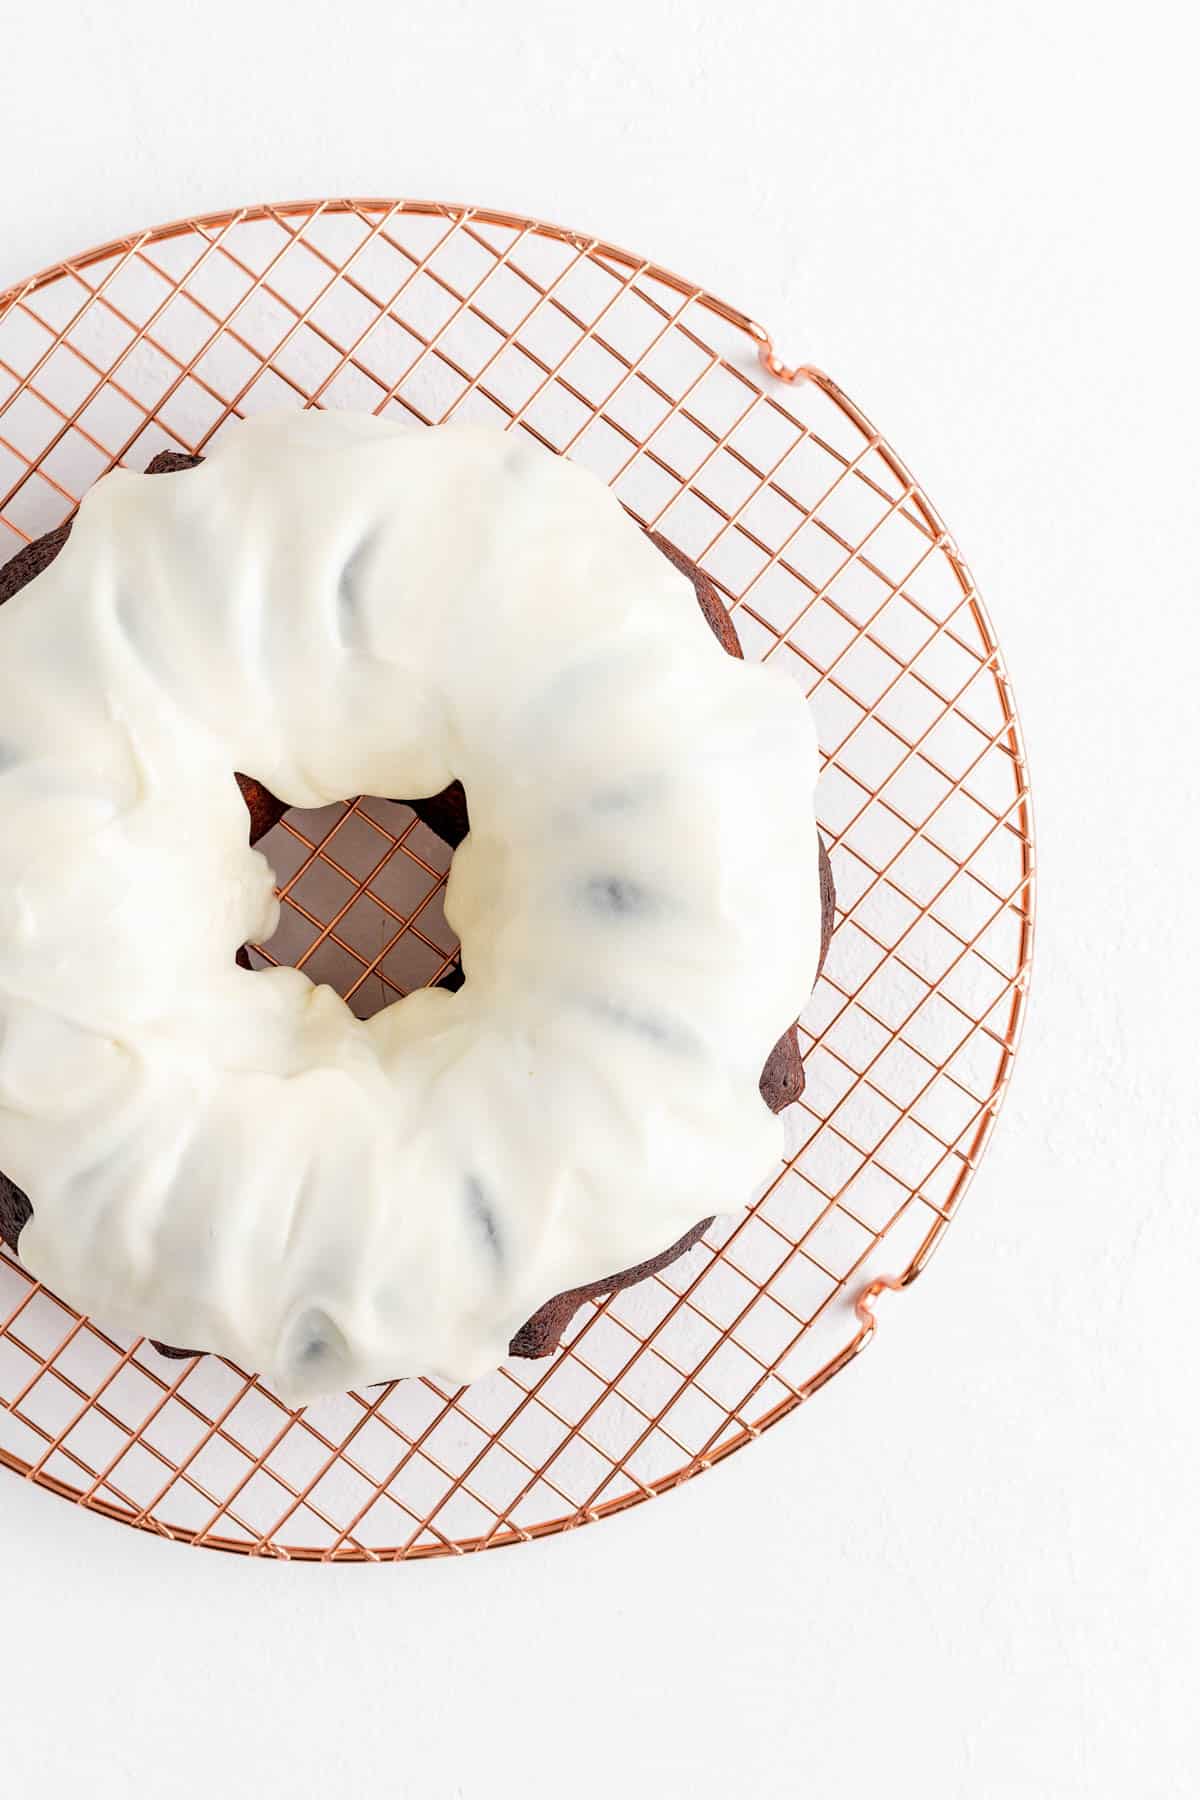 Overhead view of red bundt with white glaze dripping down from top on copper wire rack.